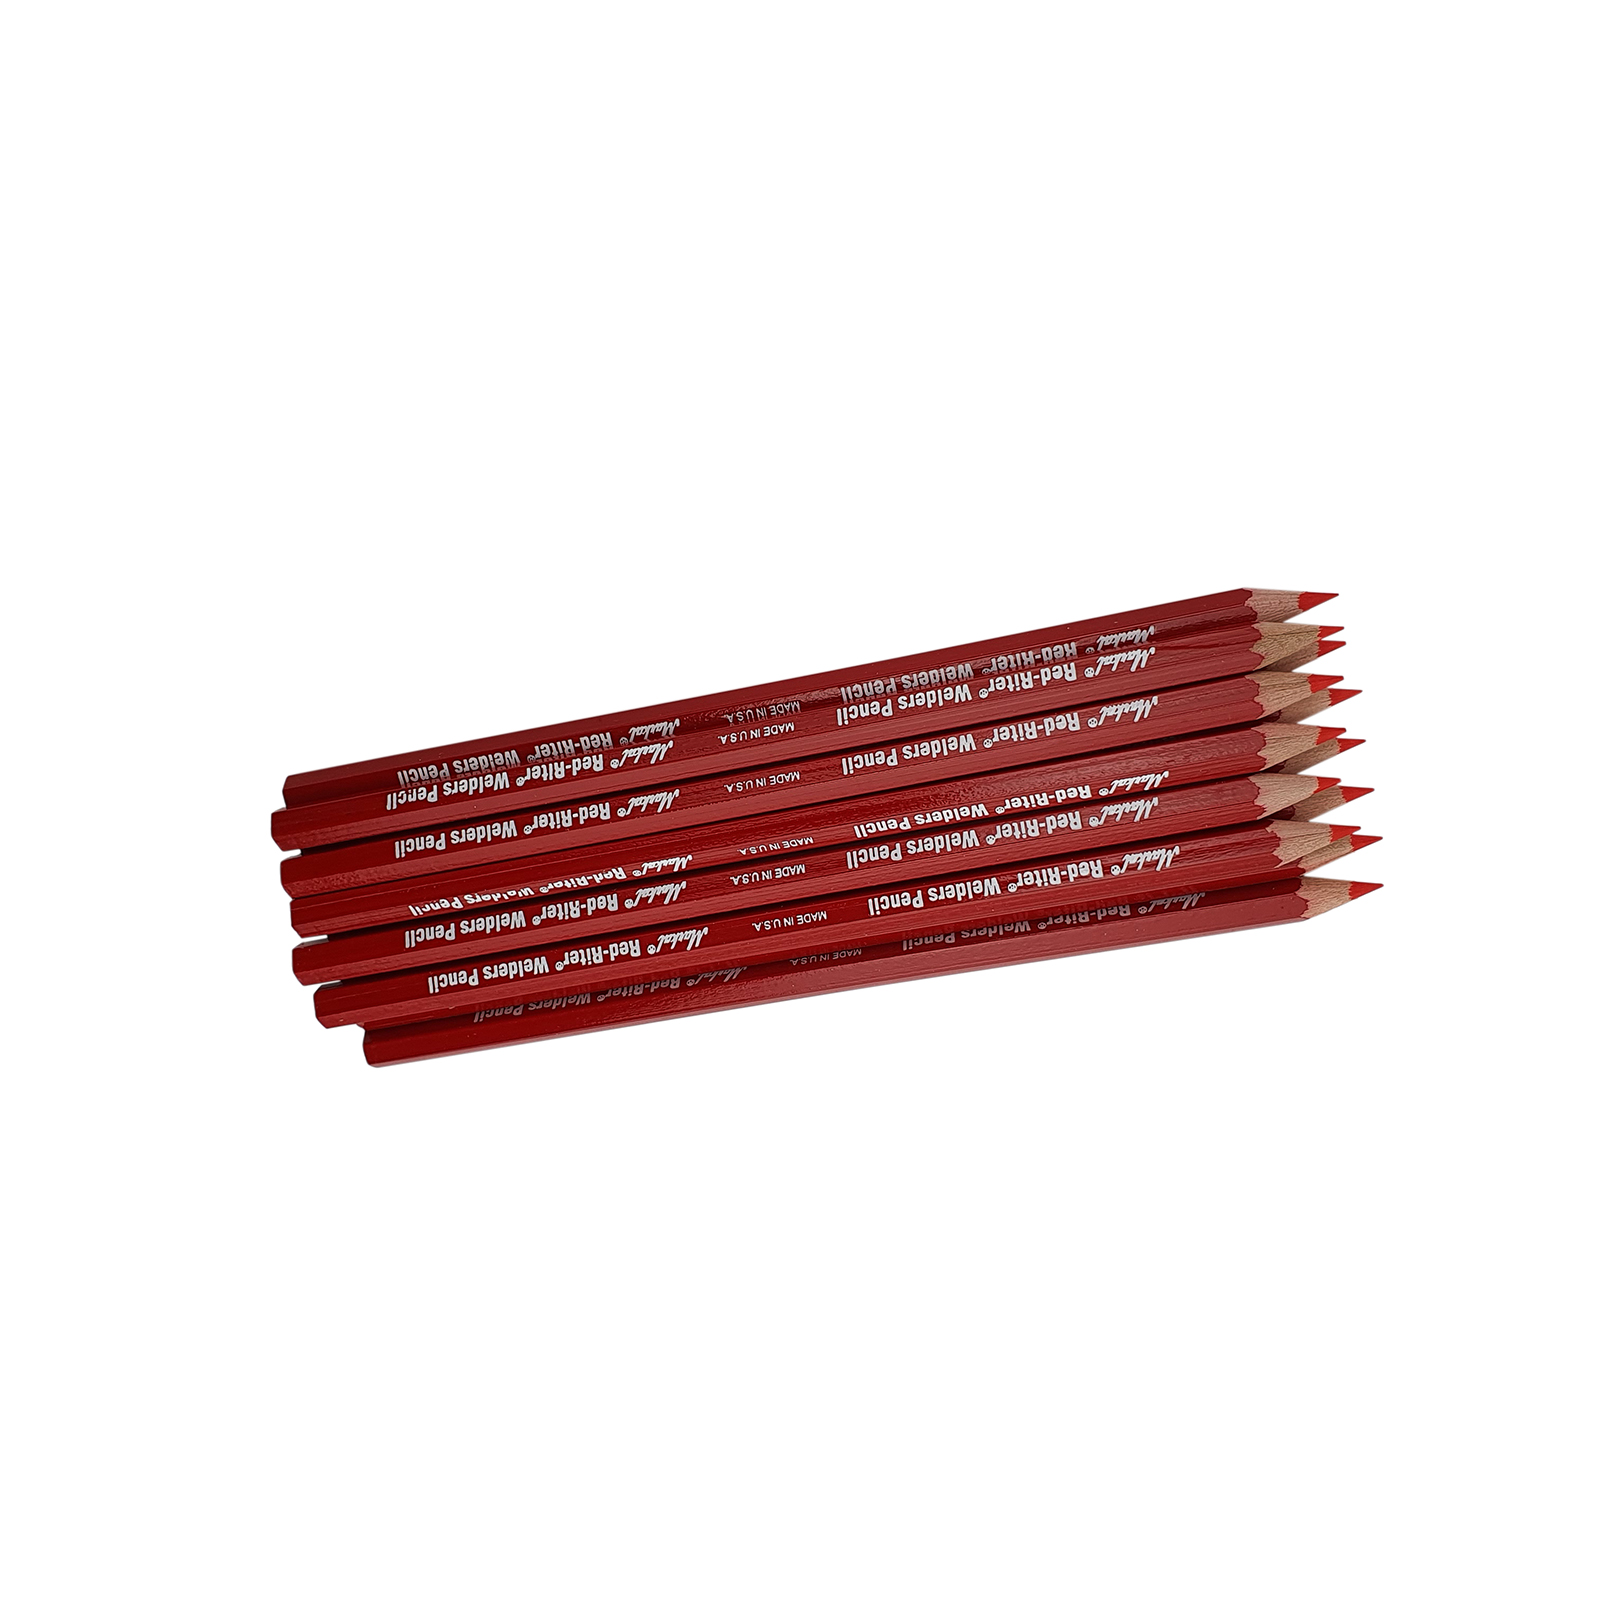 LM Fasteners Pty. Ltd. - Just Arrived! MARKAL High Performance Industrial  Markers RED-RITER & SILVER-STREAK Welder Pencils Ideal for metal layout and  fabrication work. Won't Rub off or burn off. Highly visible